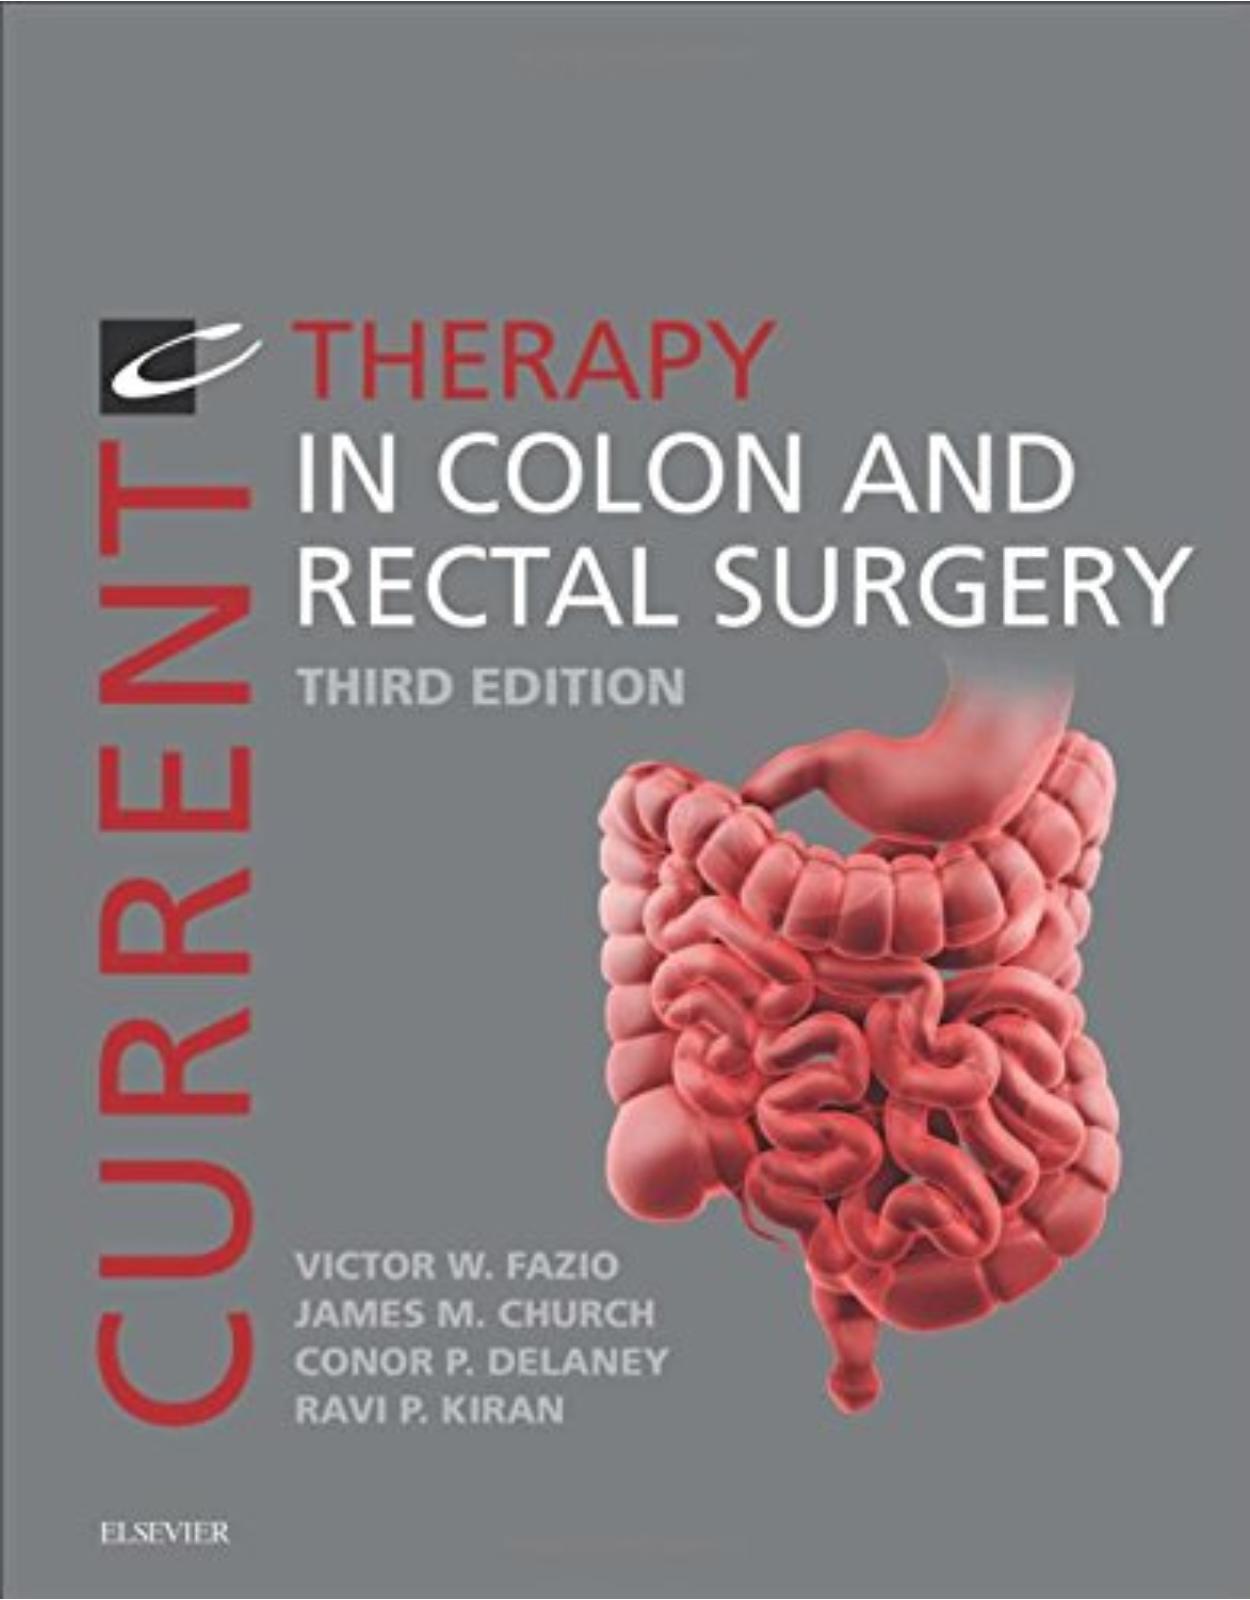 Current Therapy in Colon and Rectal Surgery, 3e